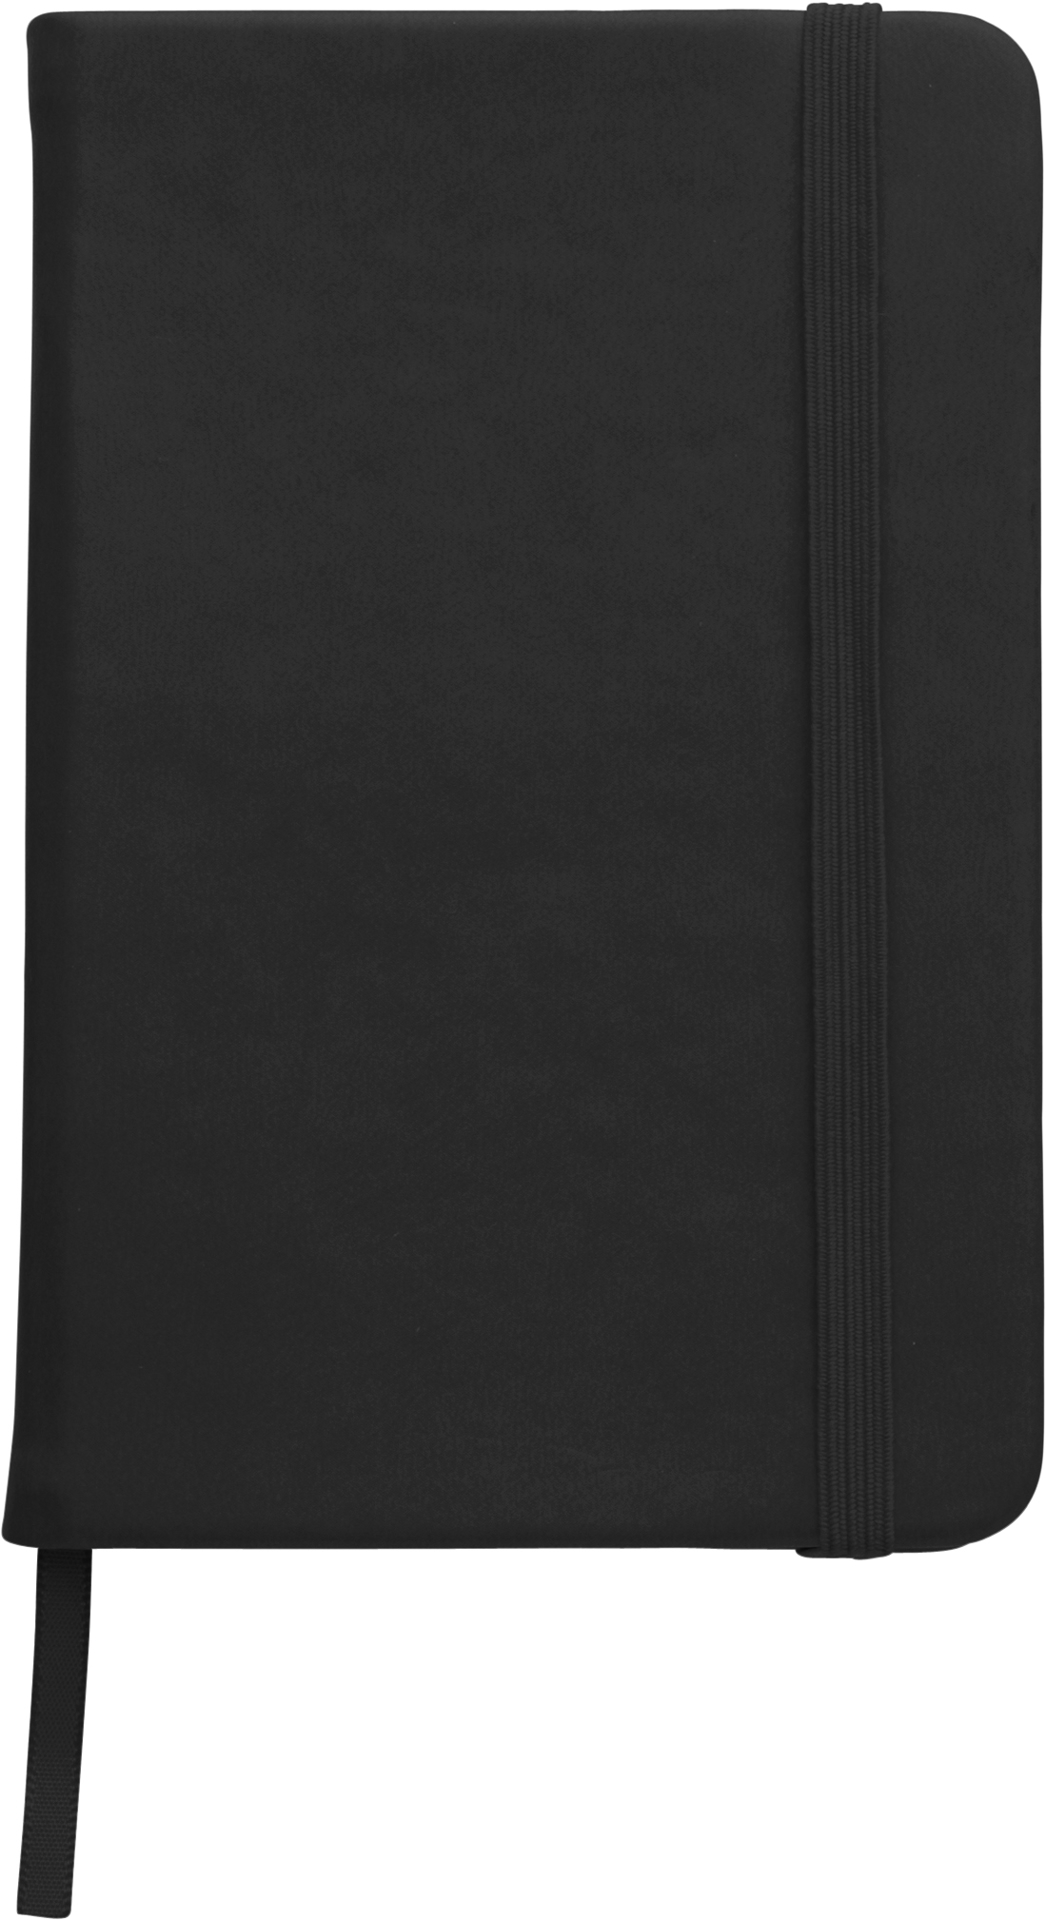 A6 Notebook with soft PU cover in black